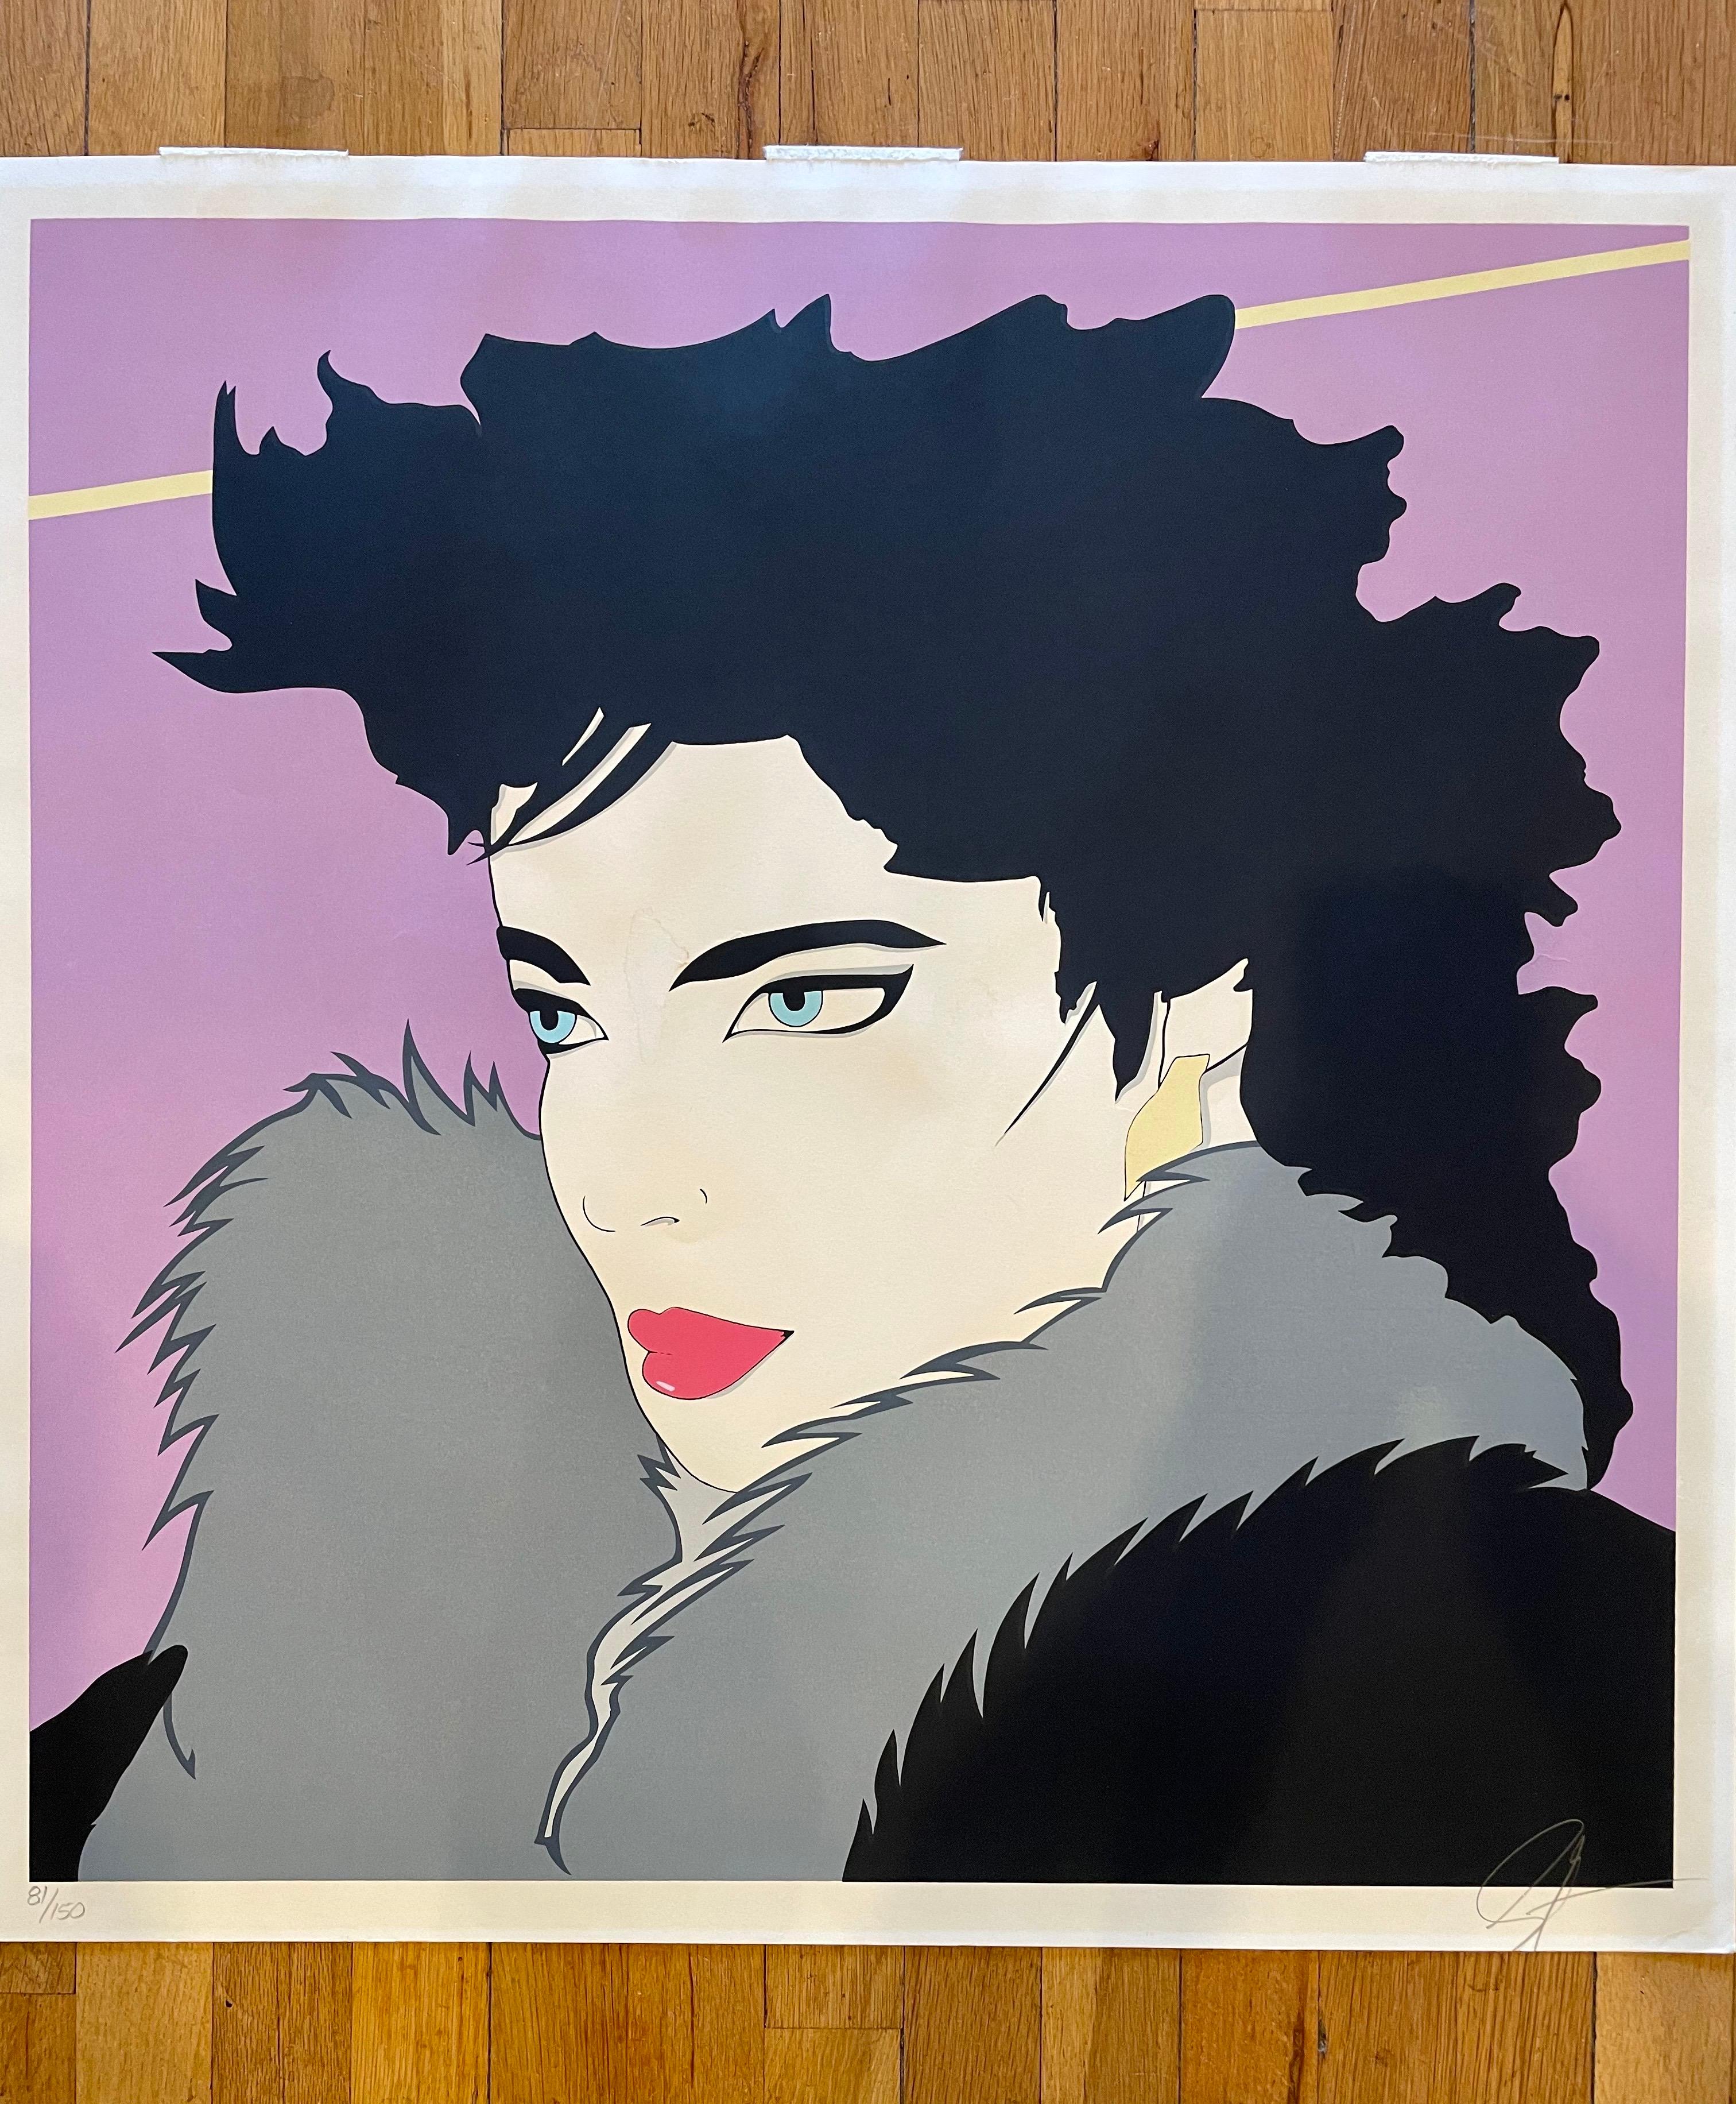 Limited edition serigraph (silkscreen) in the style of Patrick Nagel published by Mirage Editions, Santa Monica, CA, circa the early 1980s.

Patrick Nagel was an American artist who did work for Playboy magazine throughout the 1980s. He created